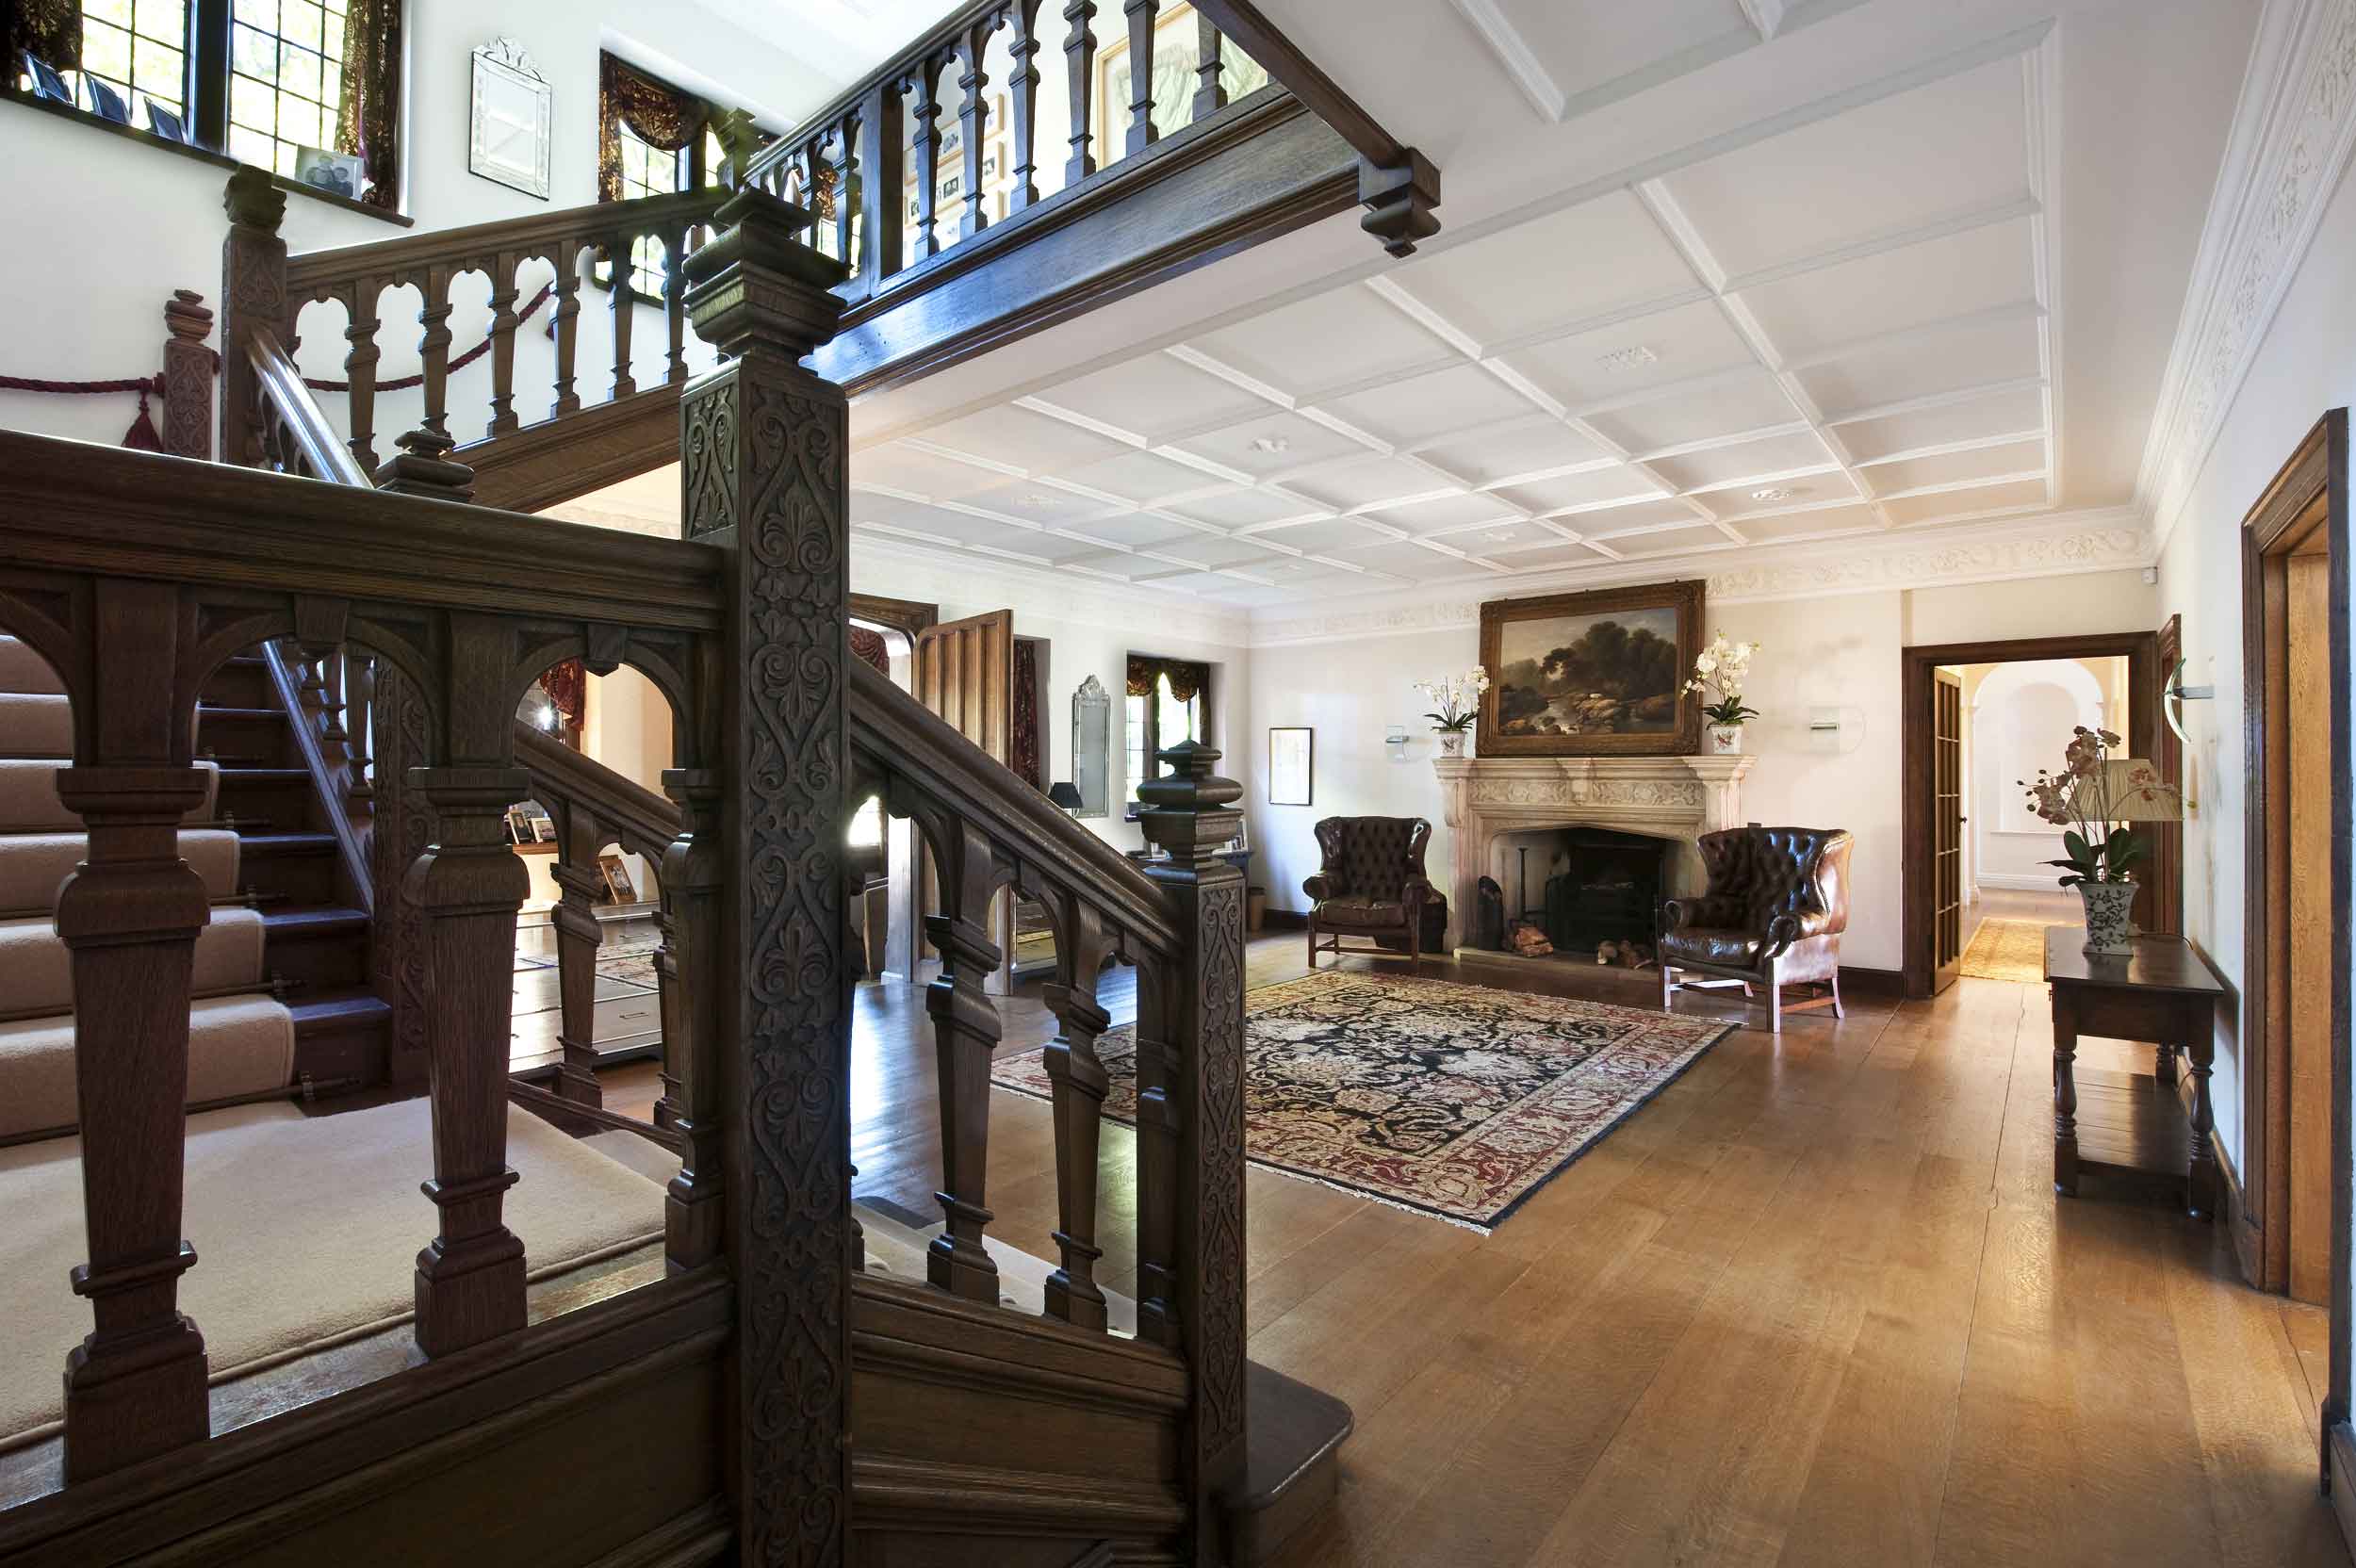 Lock House is a beautiful example of the Vernacular Revival style. The Jacobean-style staircase, which dominates the grand foyer, is among the original turn-of-the-century details.